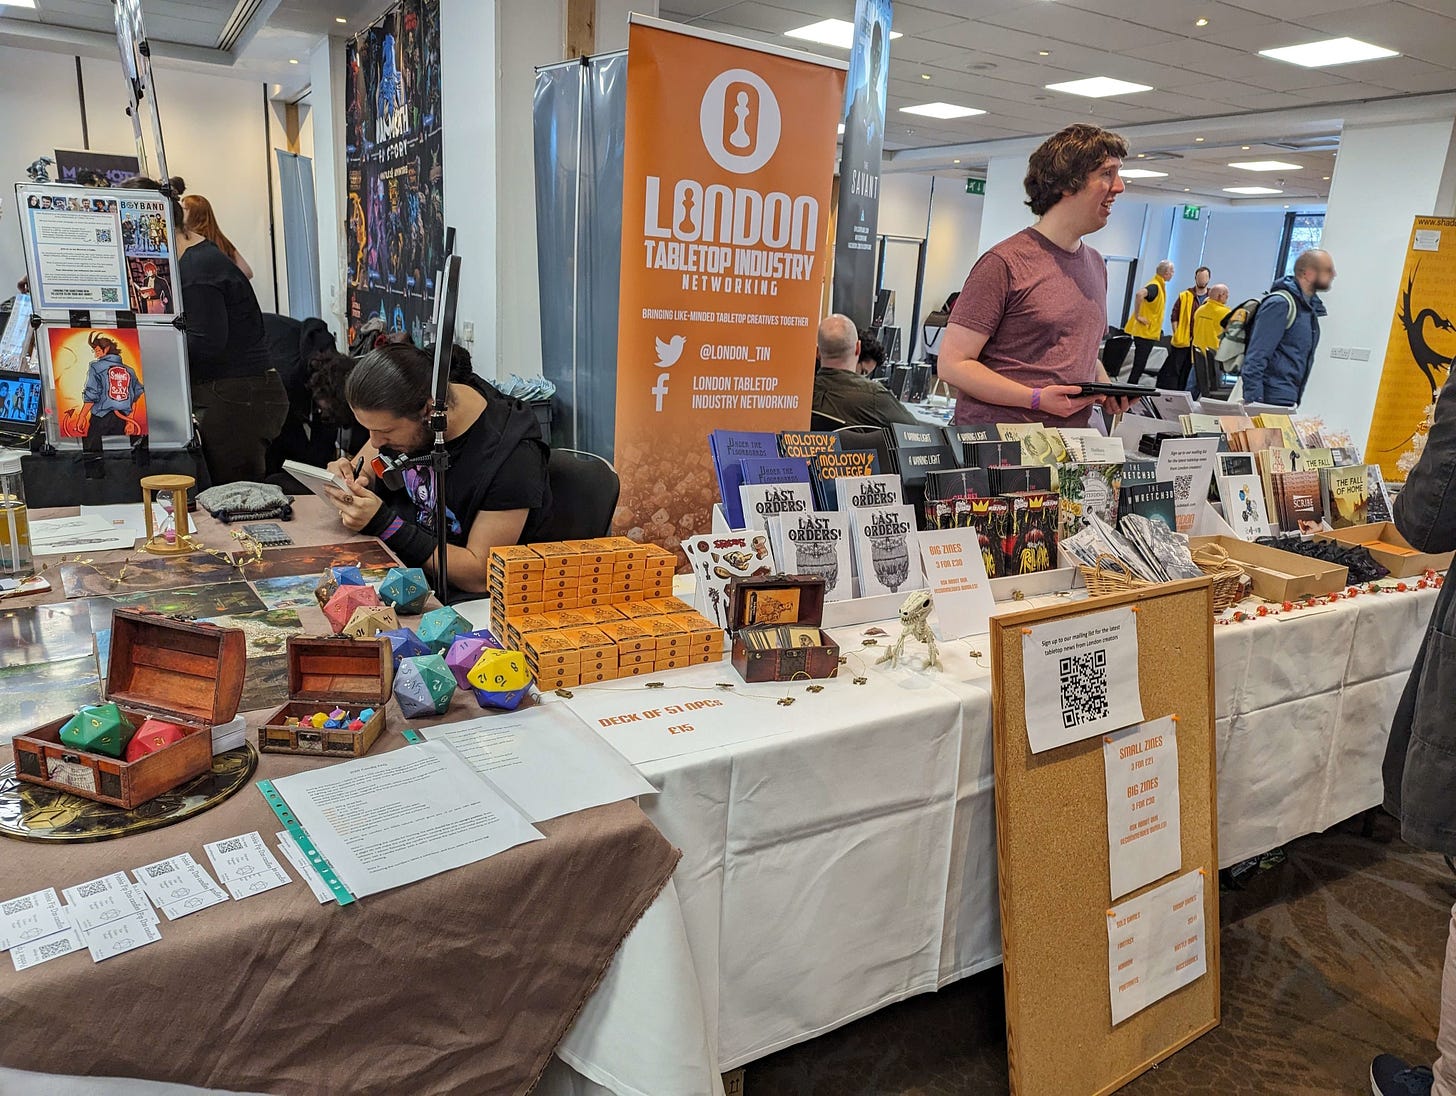 Michael Duxbury and Mikhail Malkin at the London Tabletop Industry Networking stall at Dragonmeet 2023. Visible on the table are various printed zine games on racks, character cards and dice-shaped candles.